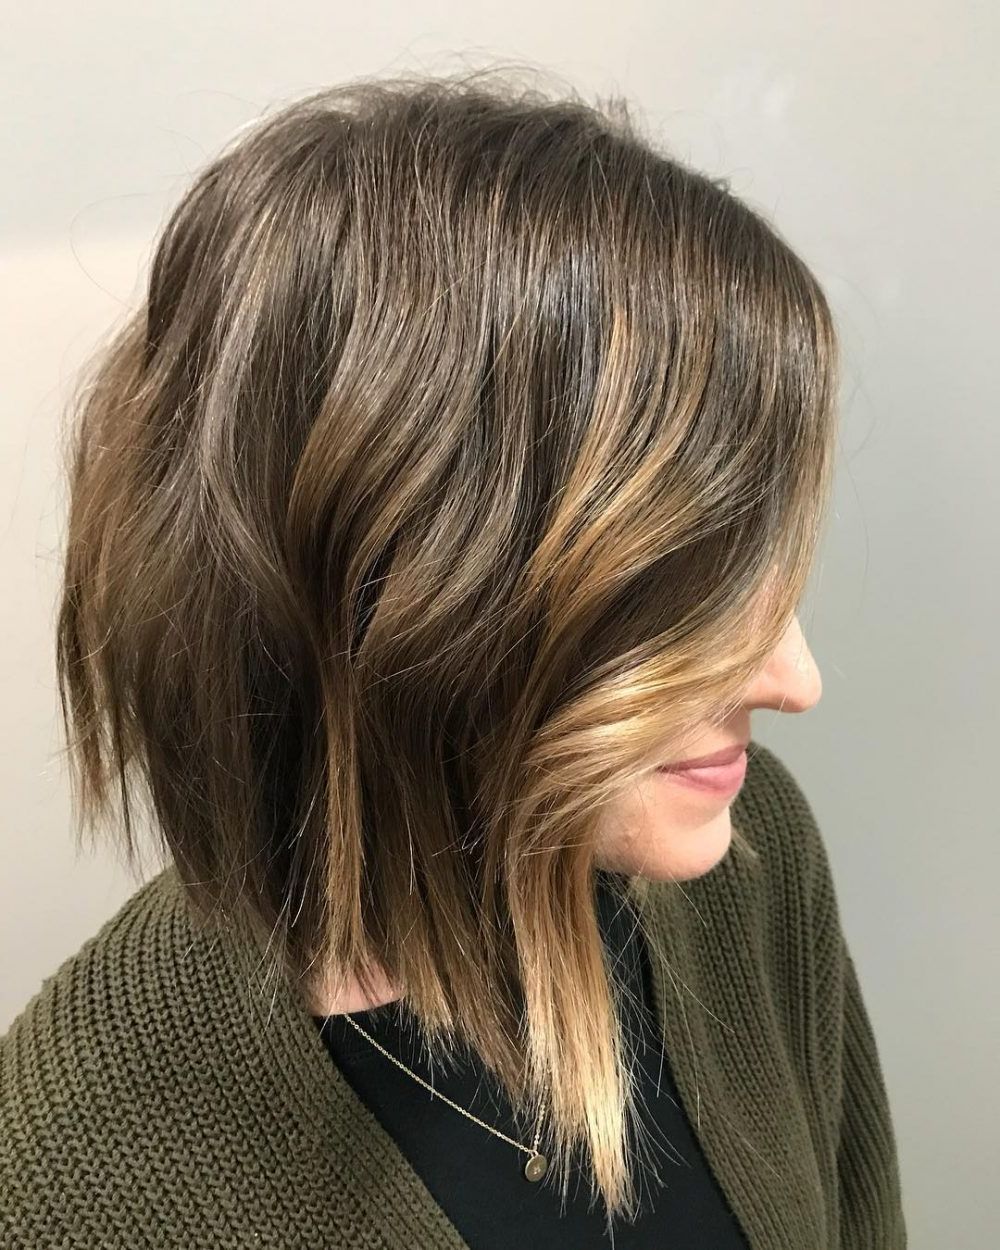 Newest Shaggy Bob Hairstyles With Choppy Layers Throughout 40 Cute Choppy Bob Hairstyles – 2020's Best Textured Bobs (View 20 of 20)